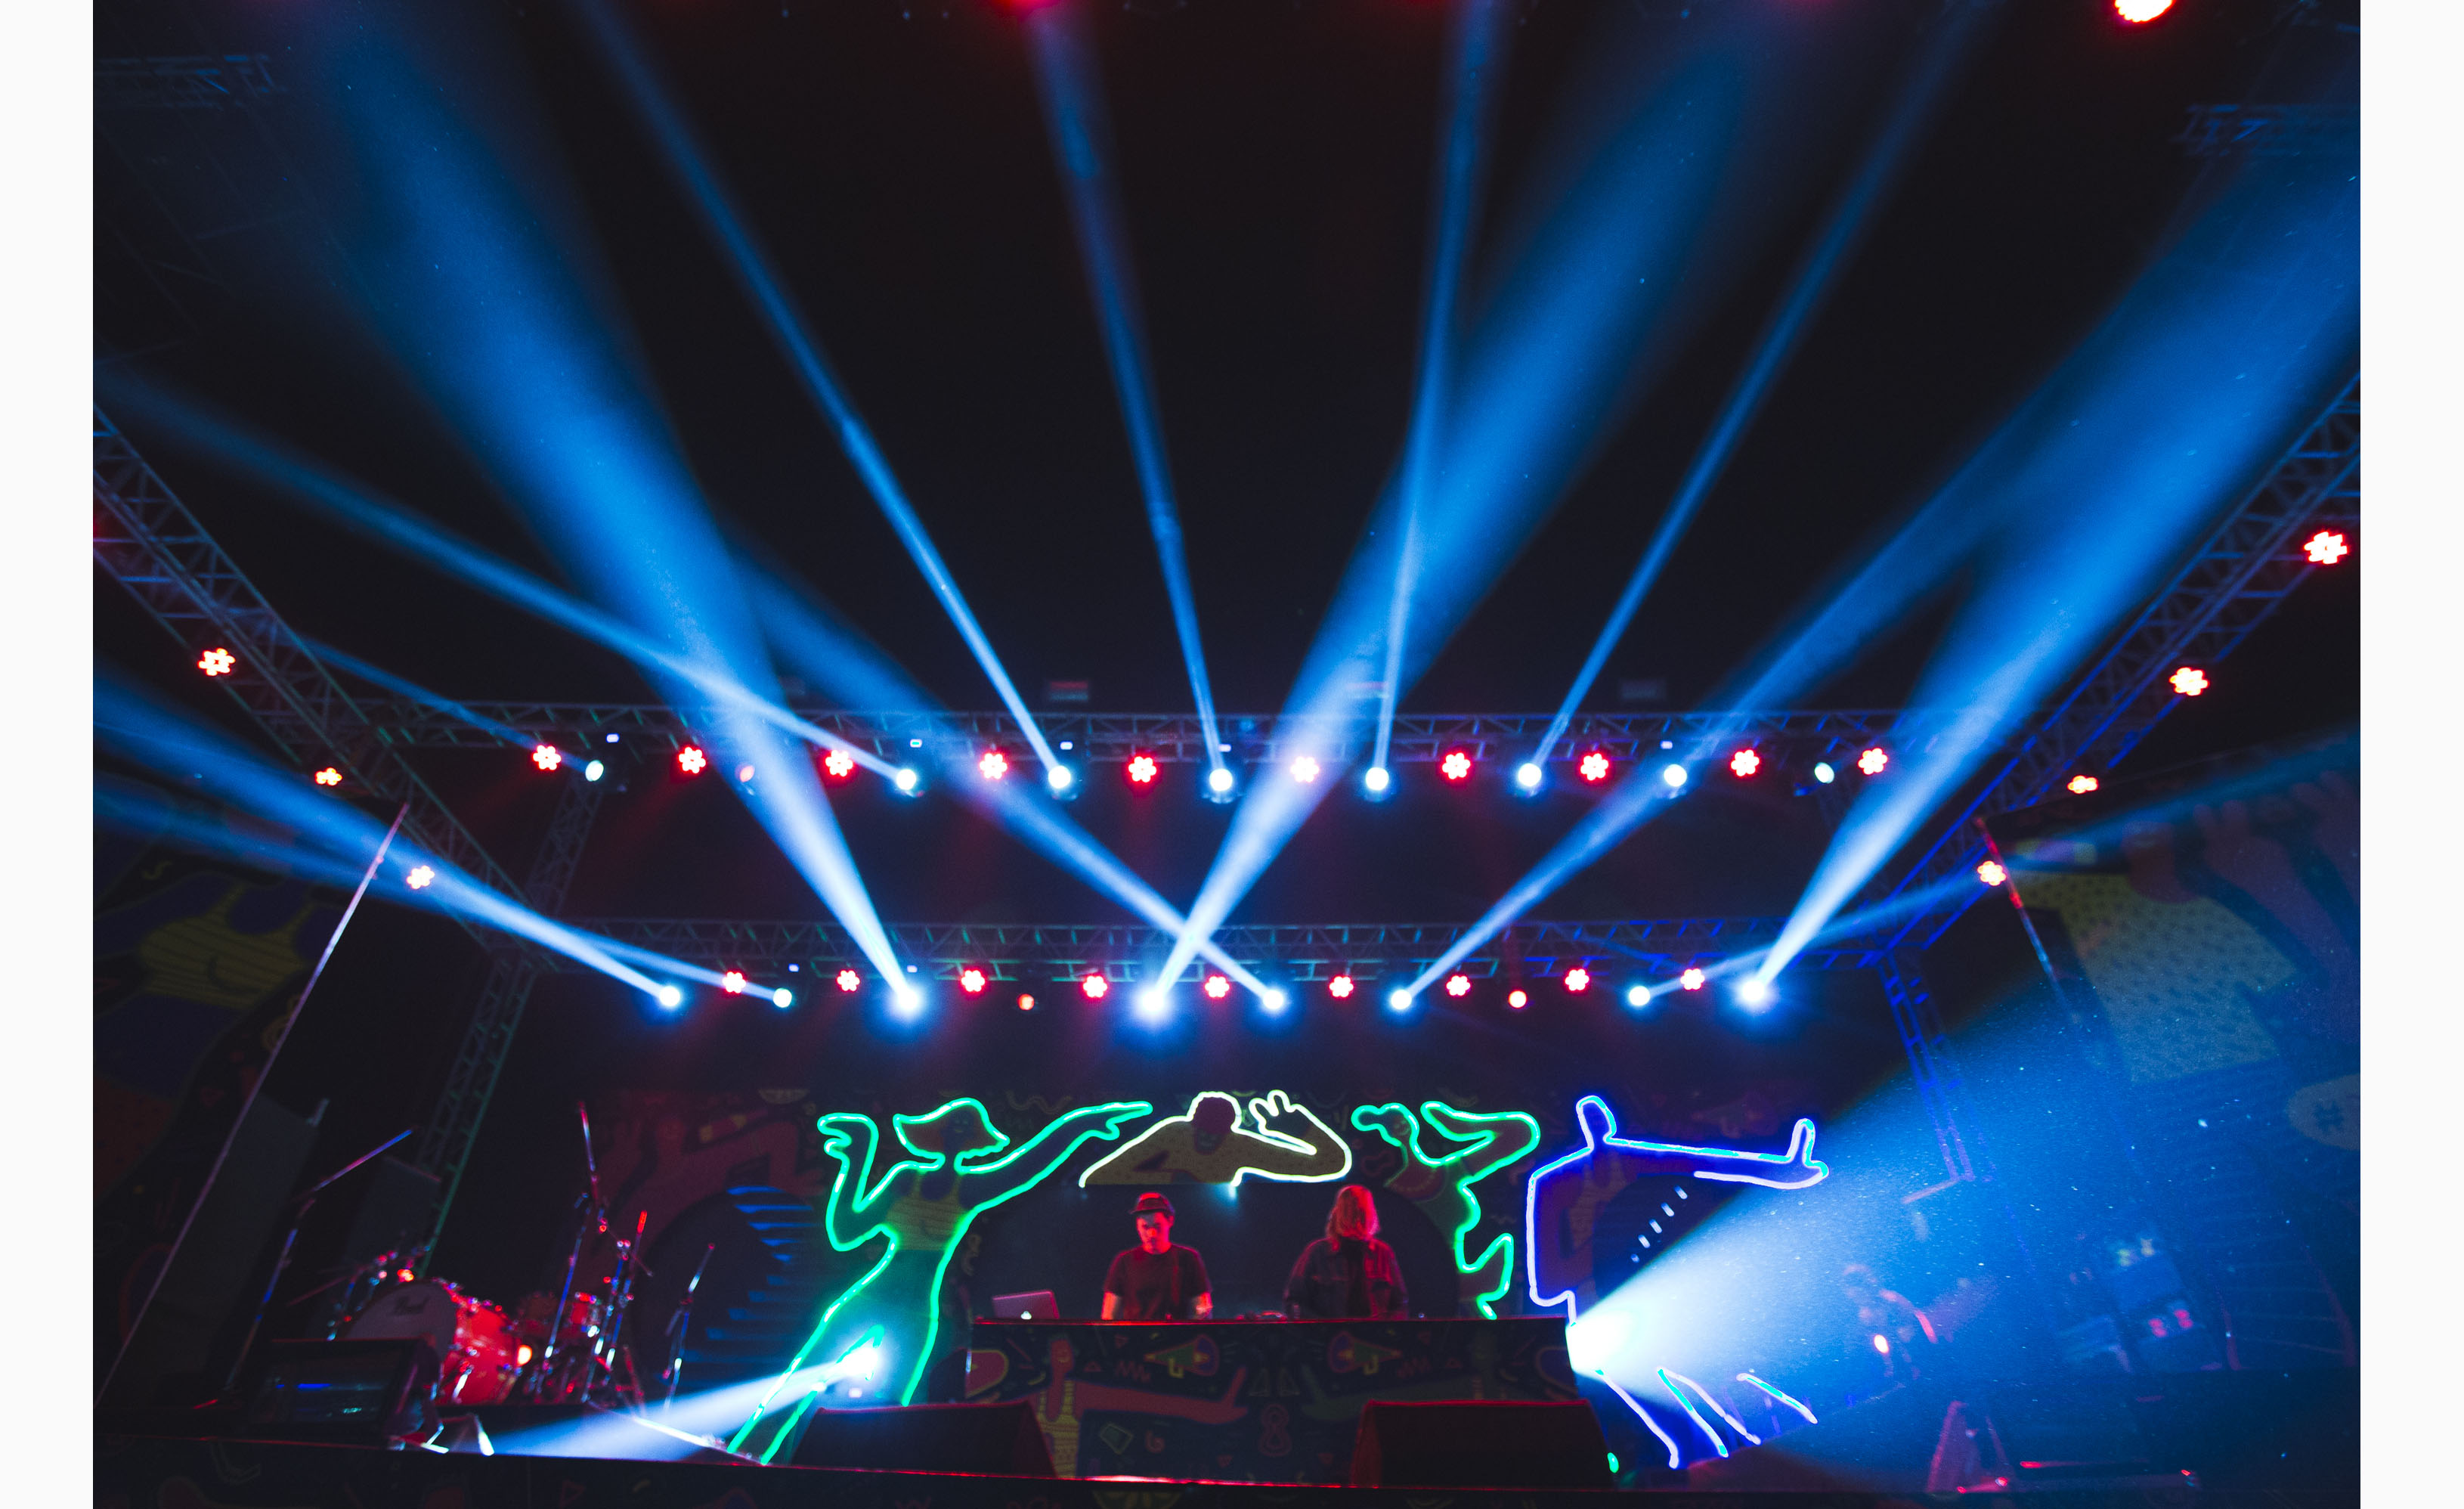  RAC (DJ Set) on Day One of the Pune edition of BACARDI NH7 Weekender Photo Credit - Parizad D